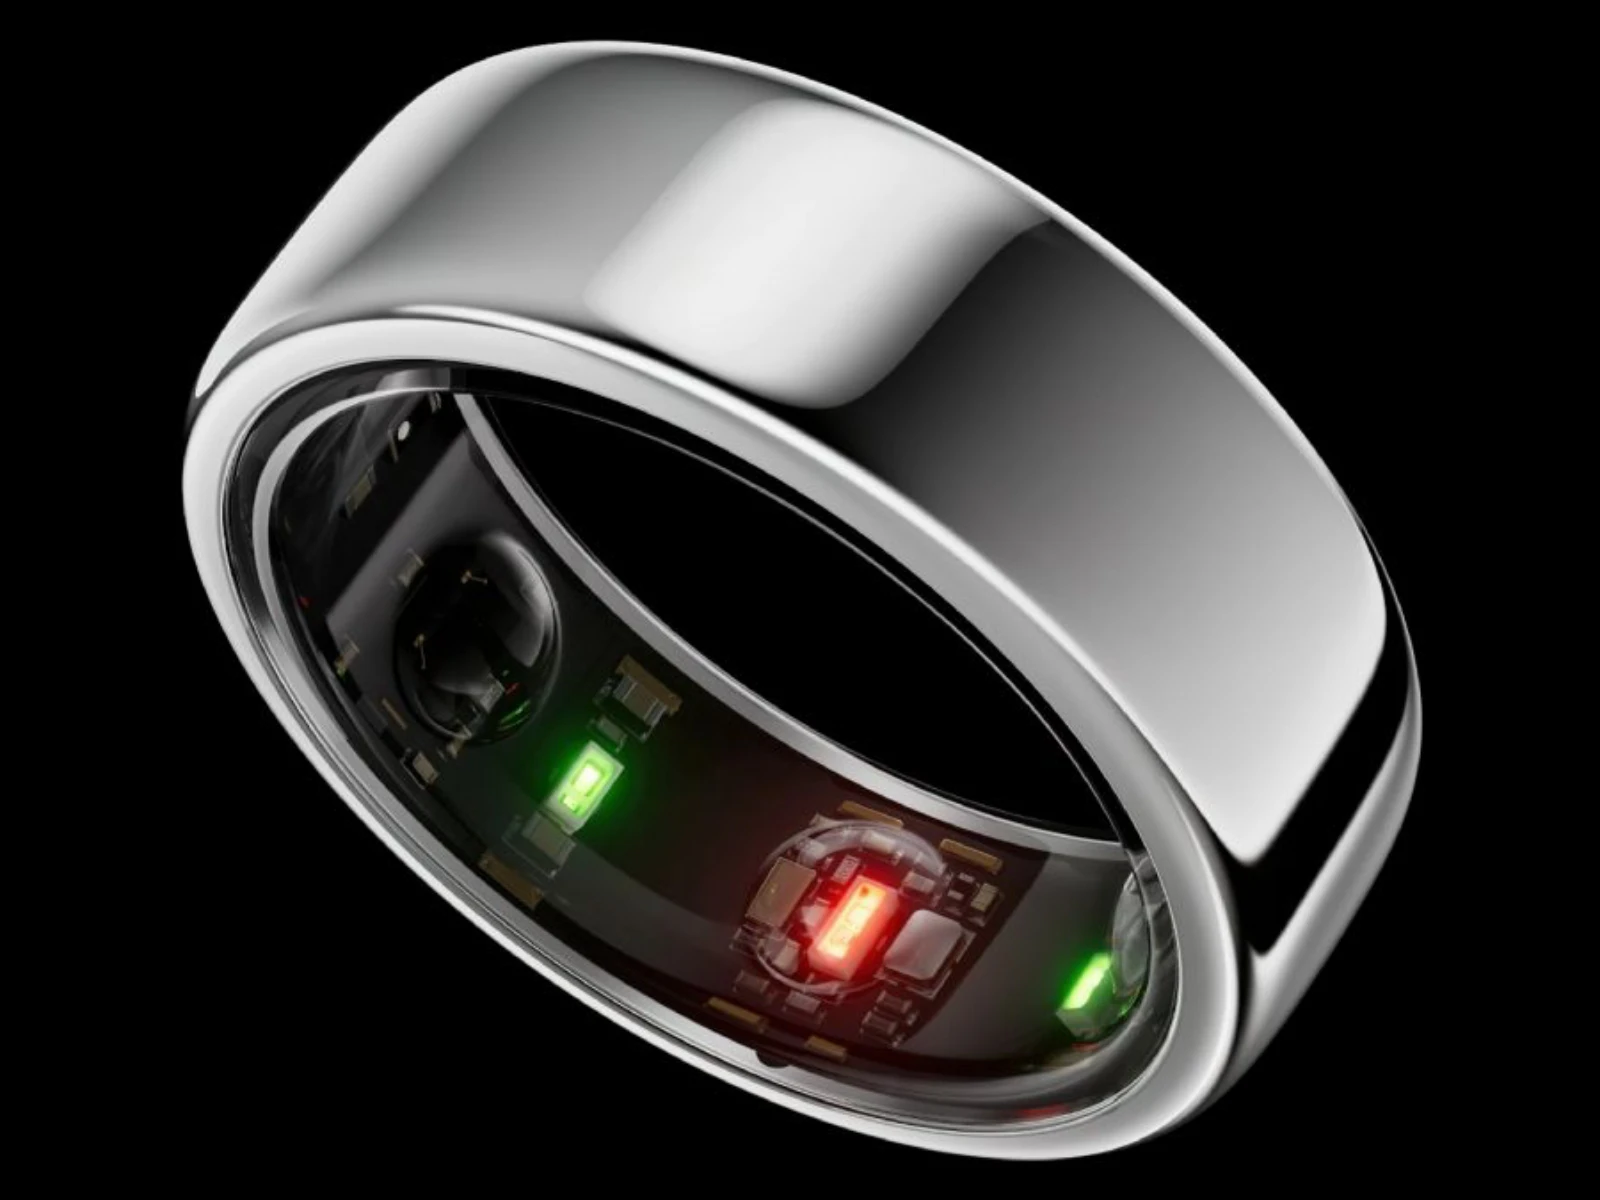 Samsung Galaxy Ring, a wearable device with multiple sensors